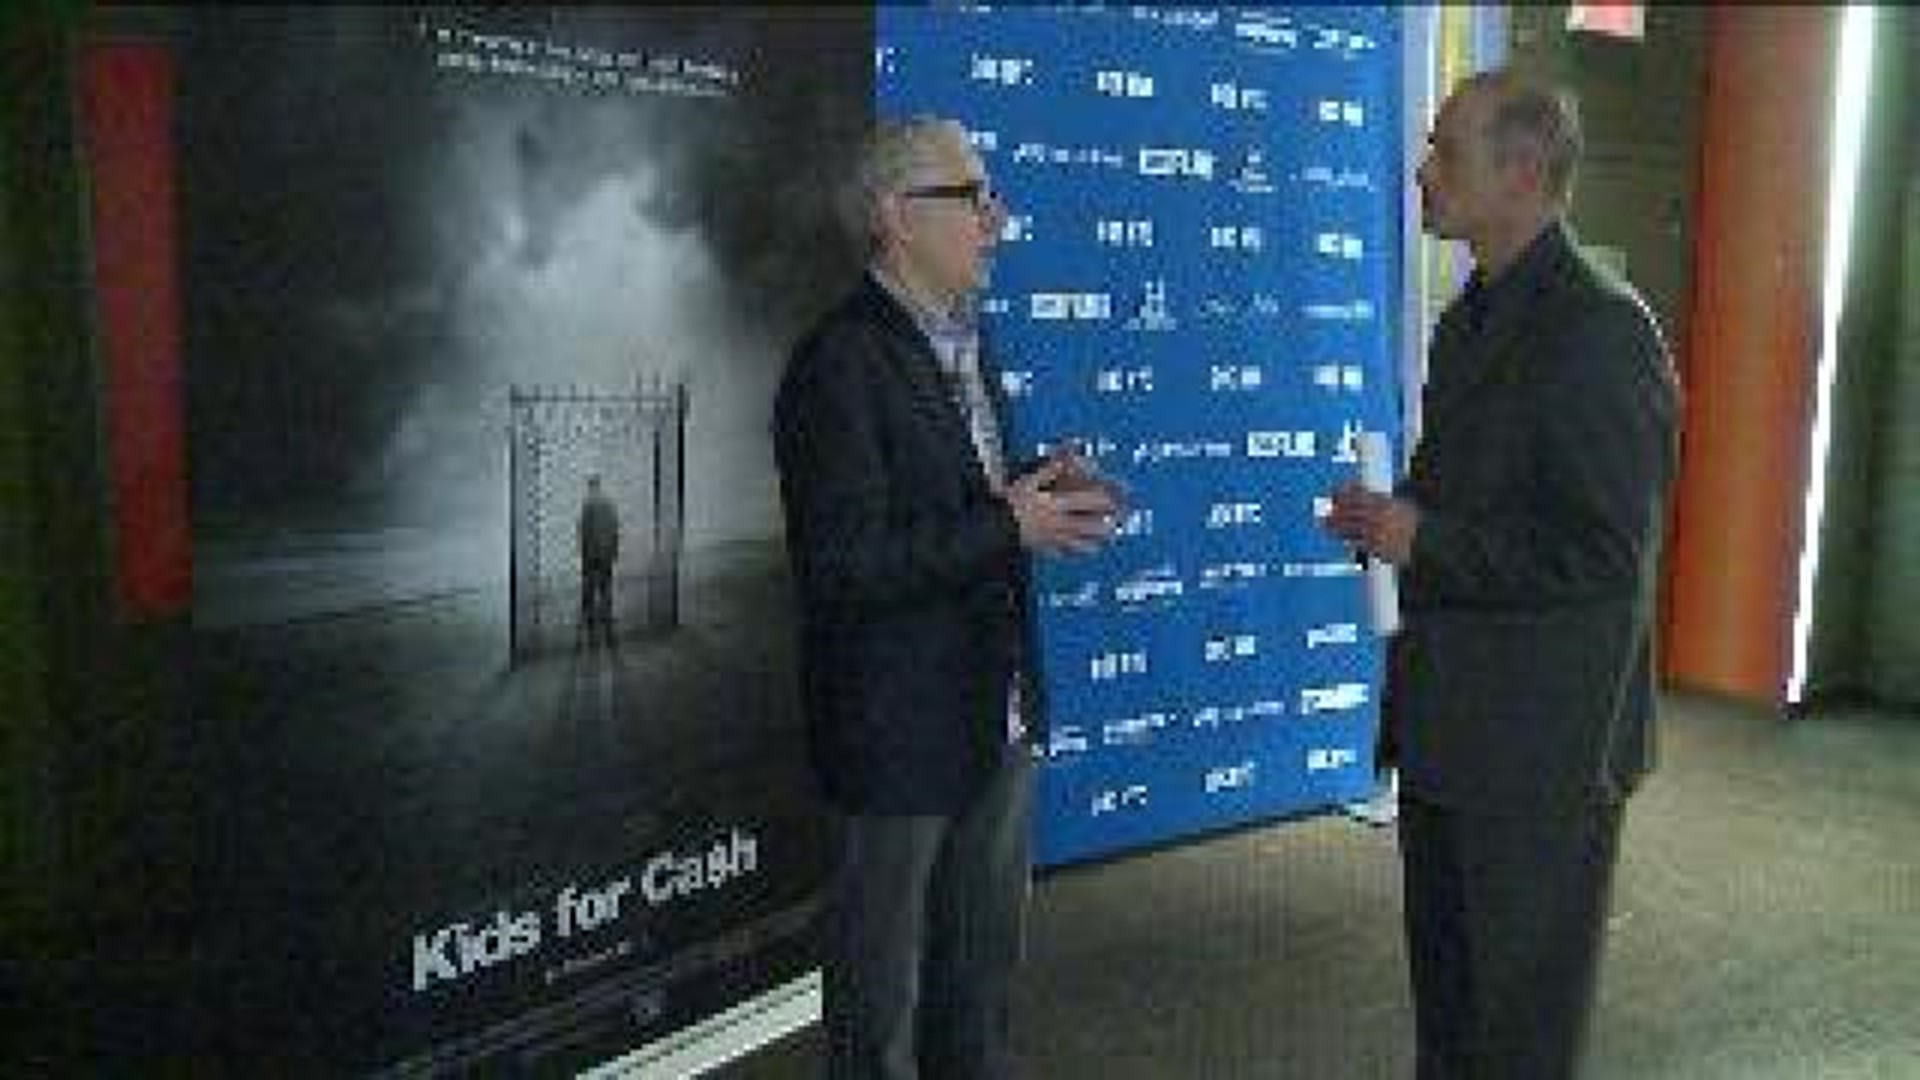 Kids For Cash Documentary Premiere in NYC